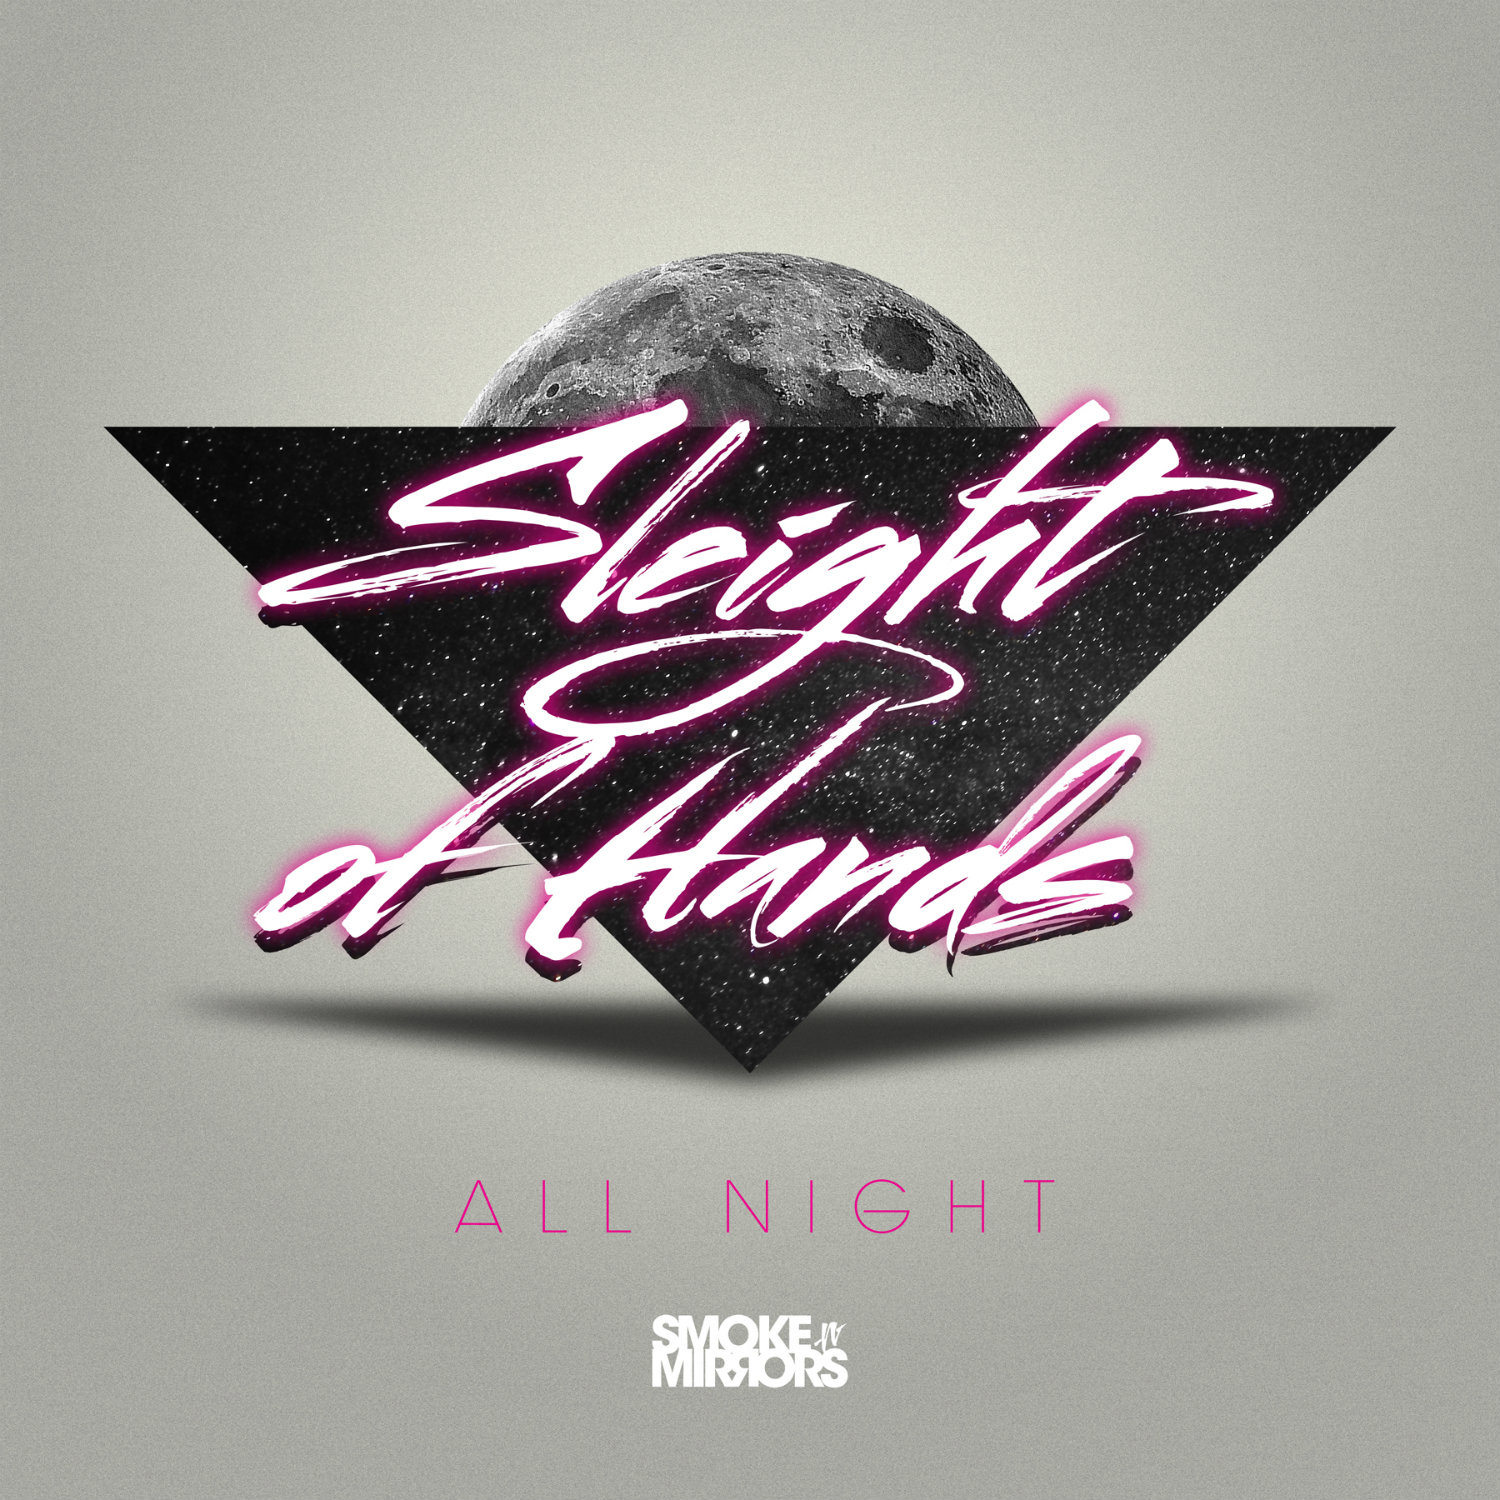 All Night. Gorilla Lounge Music. Sleight of hand. L.O.L. Sleight all Day. Night shakes